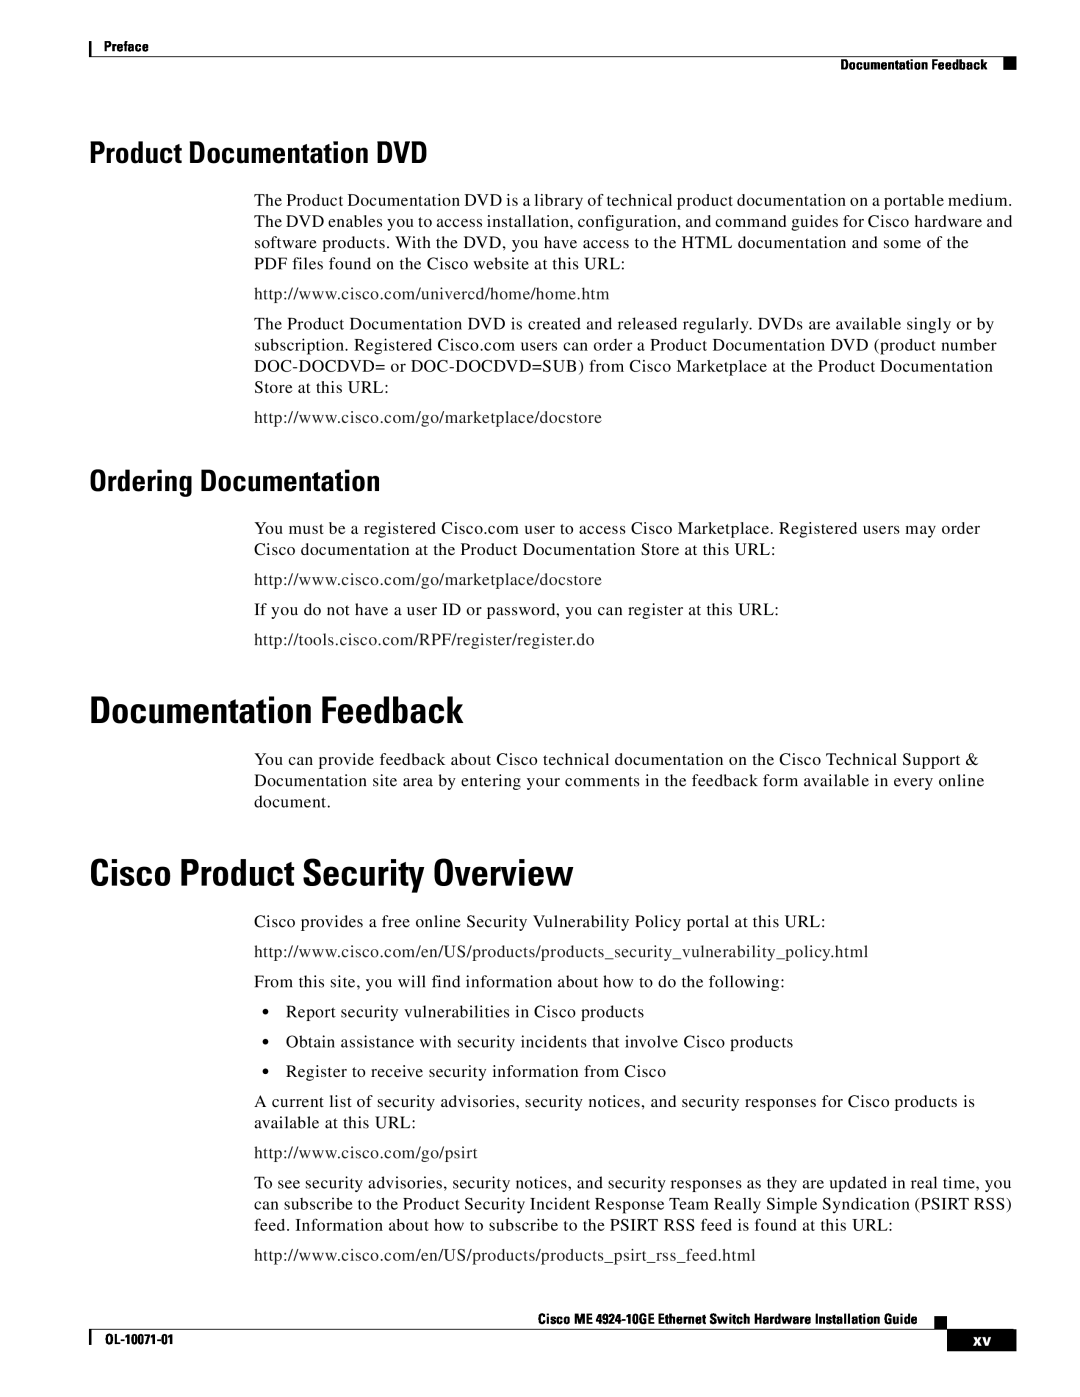 Cisco Systems ME 4924-10GE manual Documentation Feedback, Cisco Product Security Overview, Product Documentation DVD 